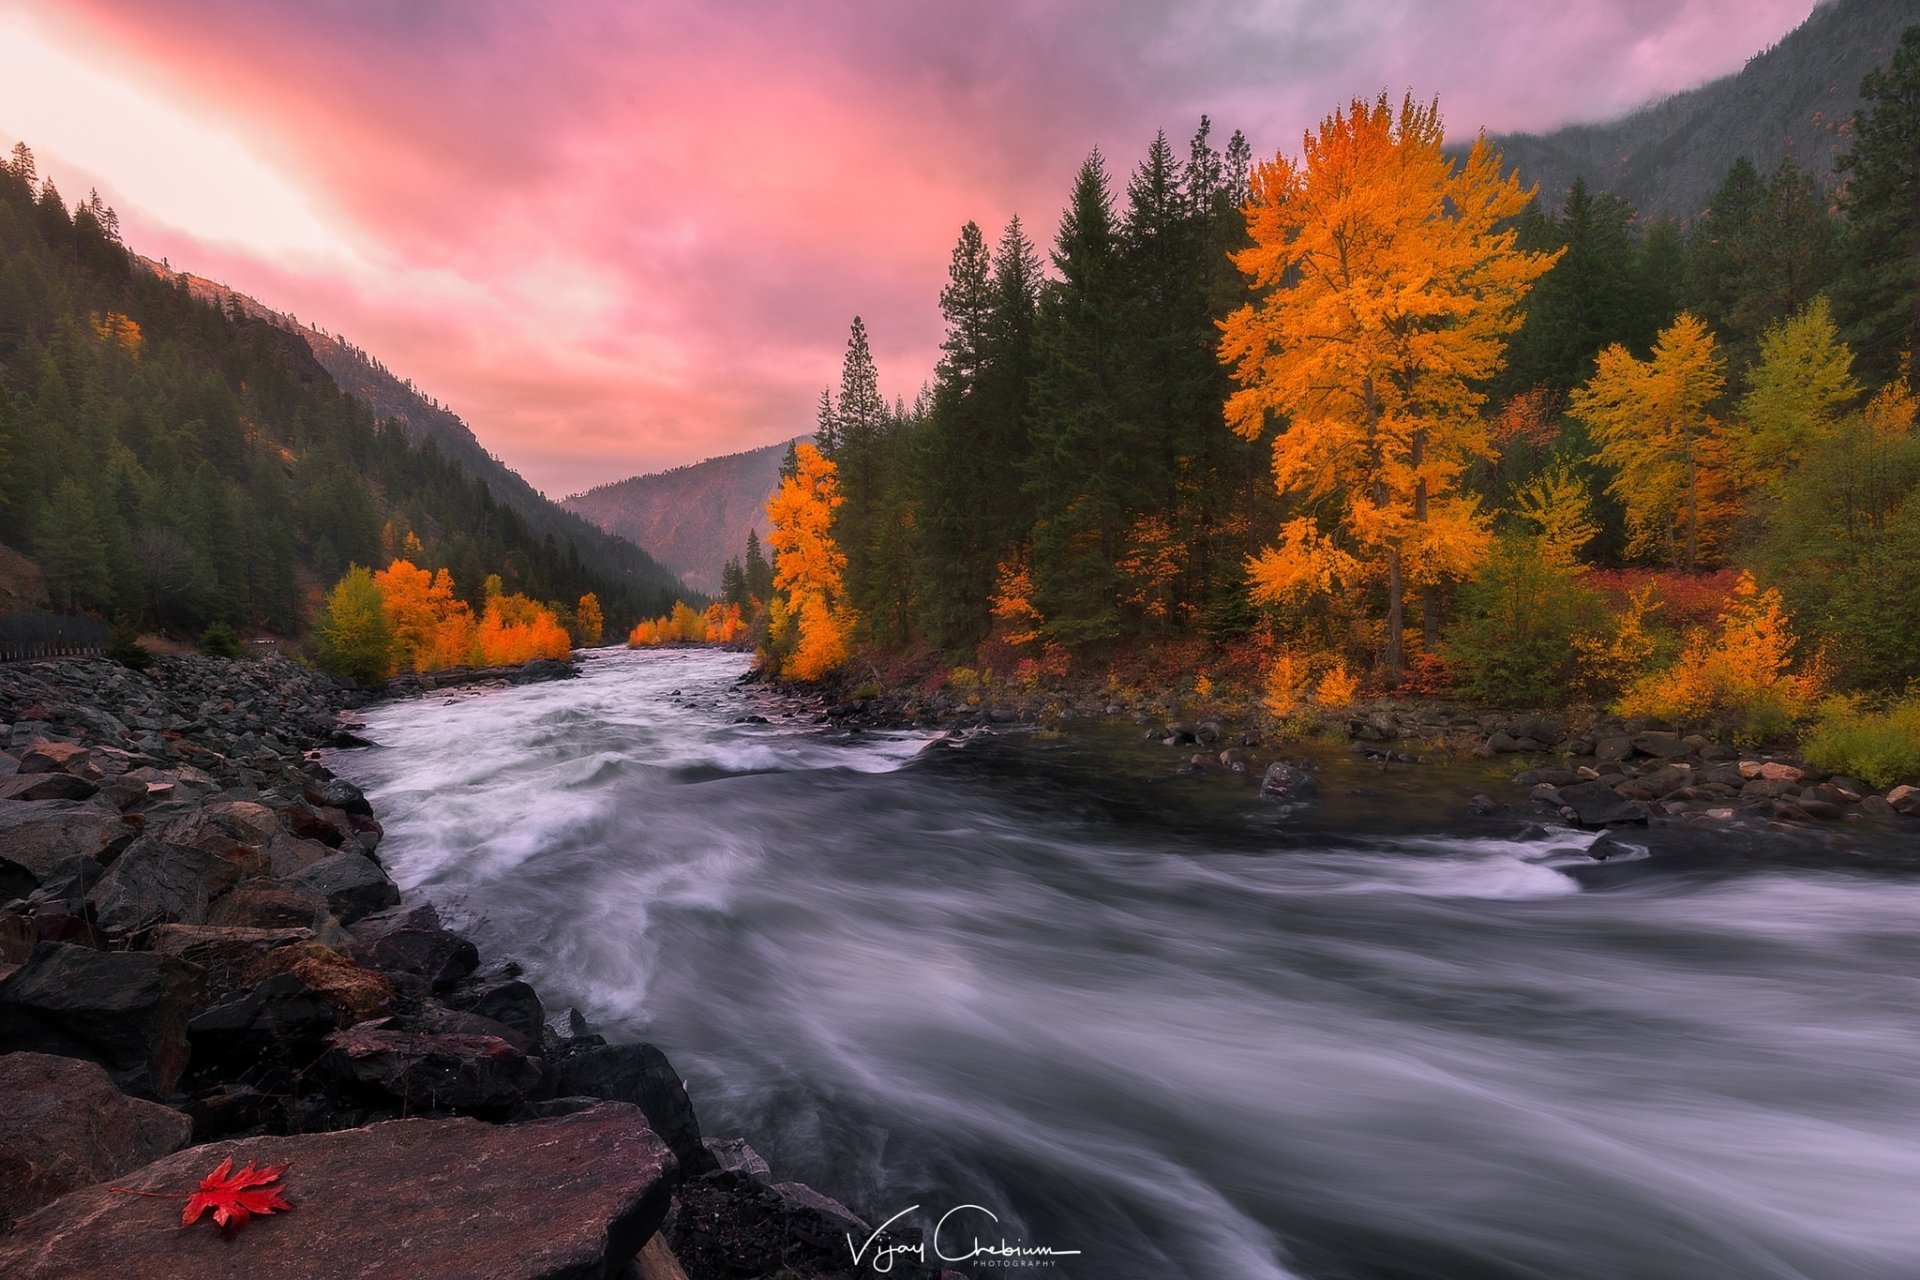 Mountain River In Autumn Hd Wallpaper Background Image 2048x1365